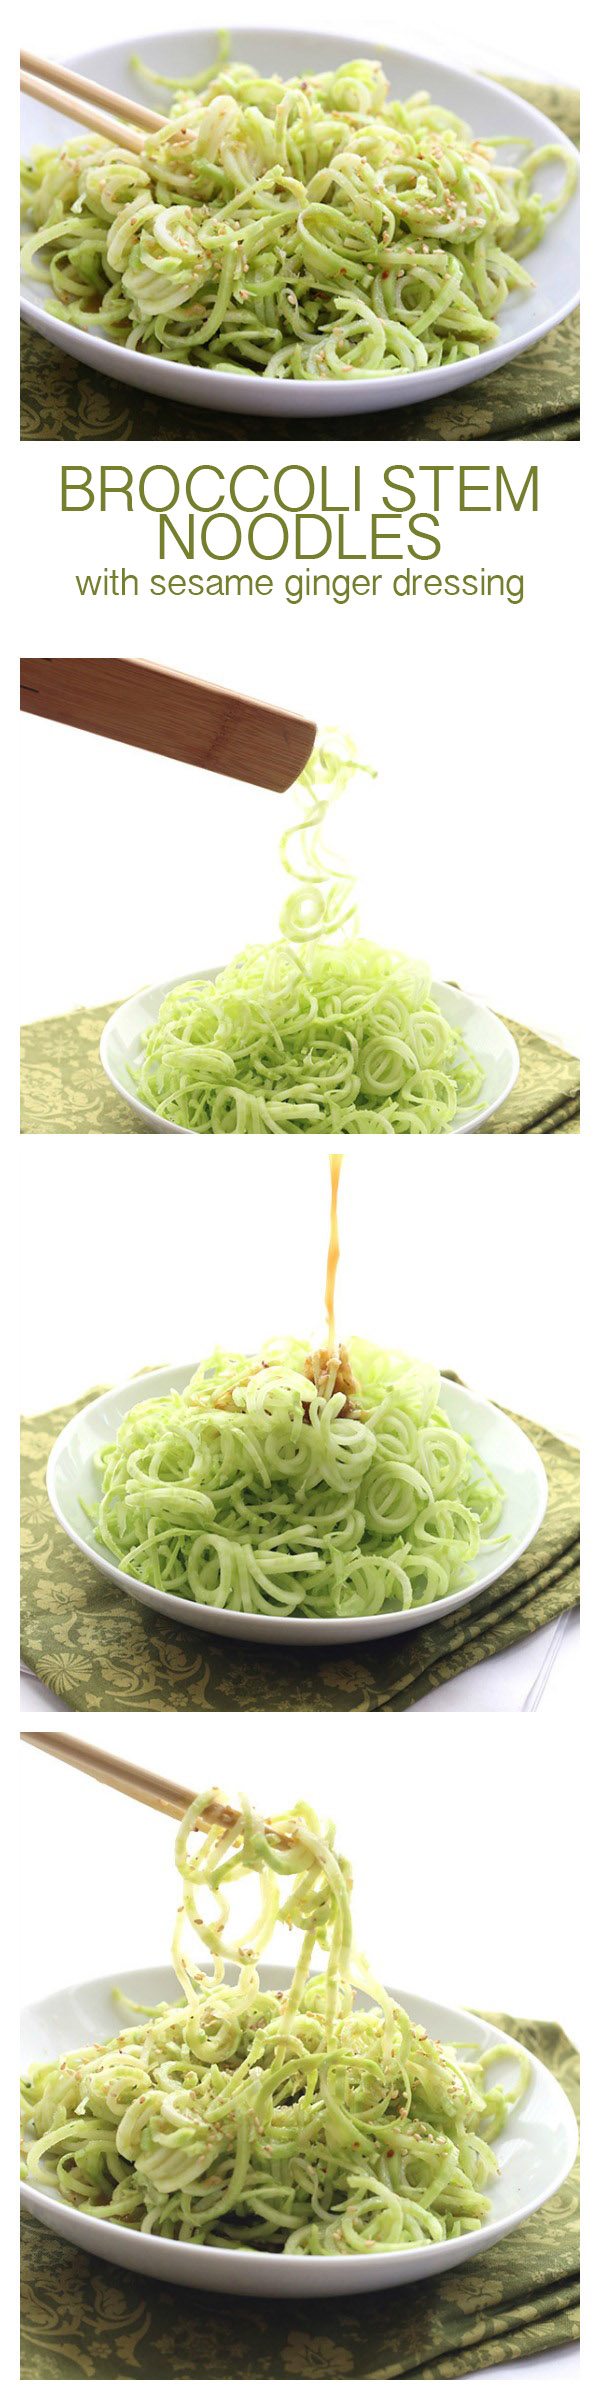 Low carb noodles made from broccoli stalks and topped with a spicy ginger sesame dressing. A healthy summer side dish or salad.